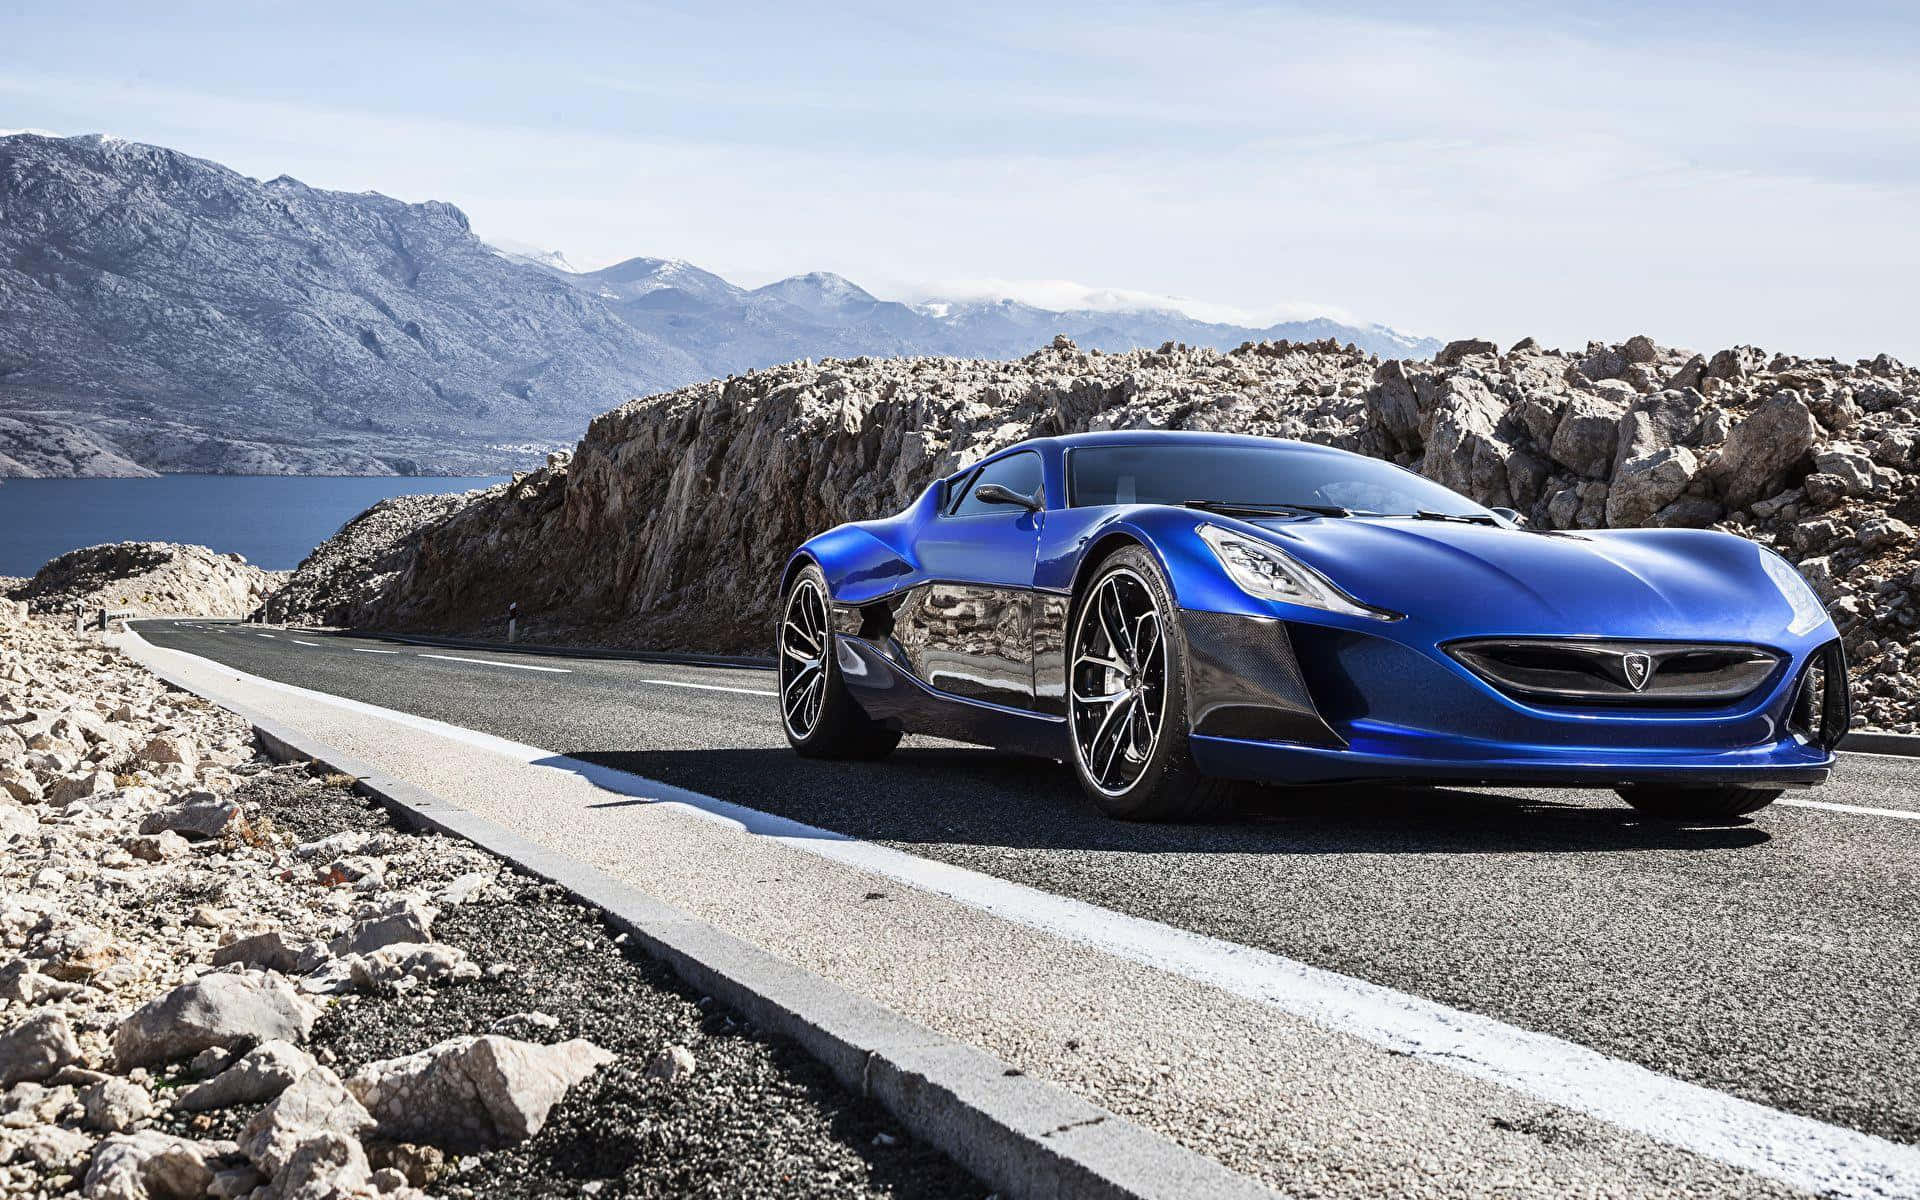 Luxurious Rimac Concept One Cruising On A City Road Wallpaper